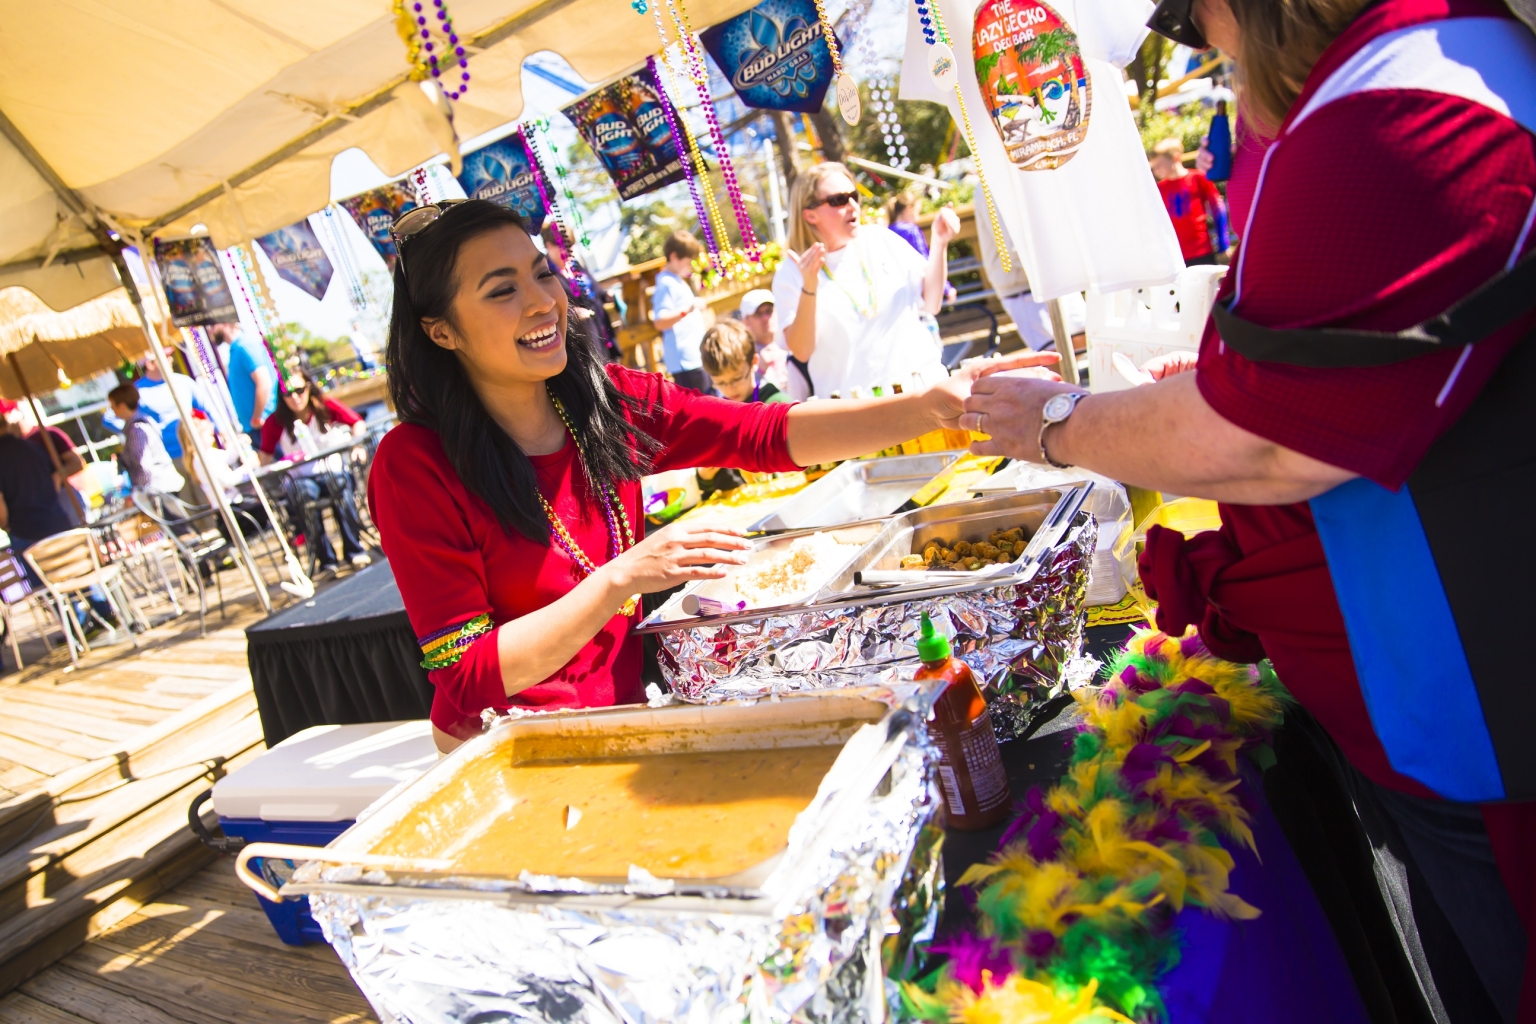 A woman serves food to a festival attendee